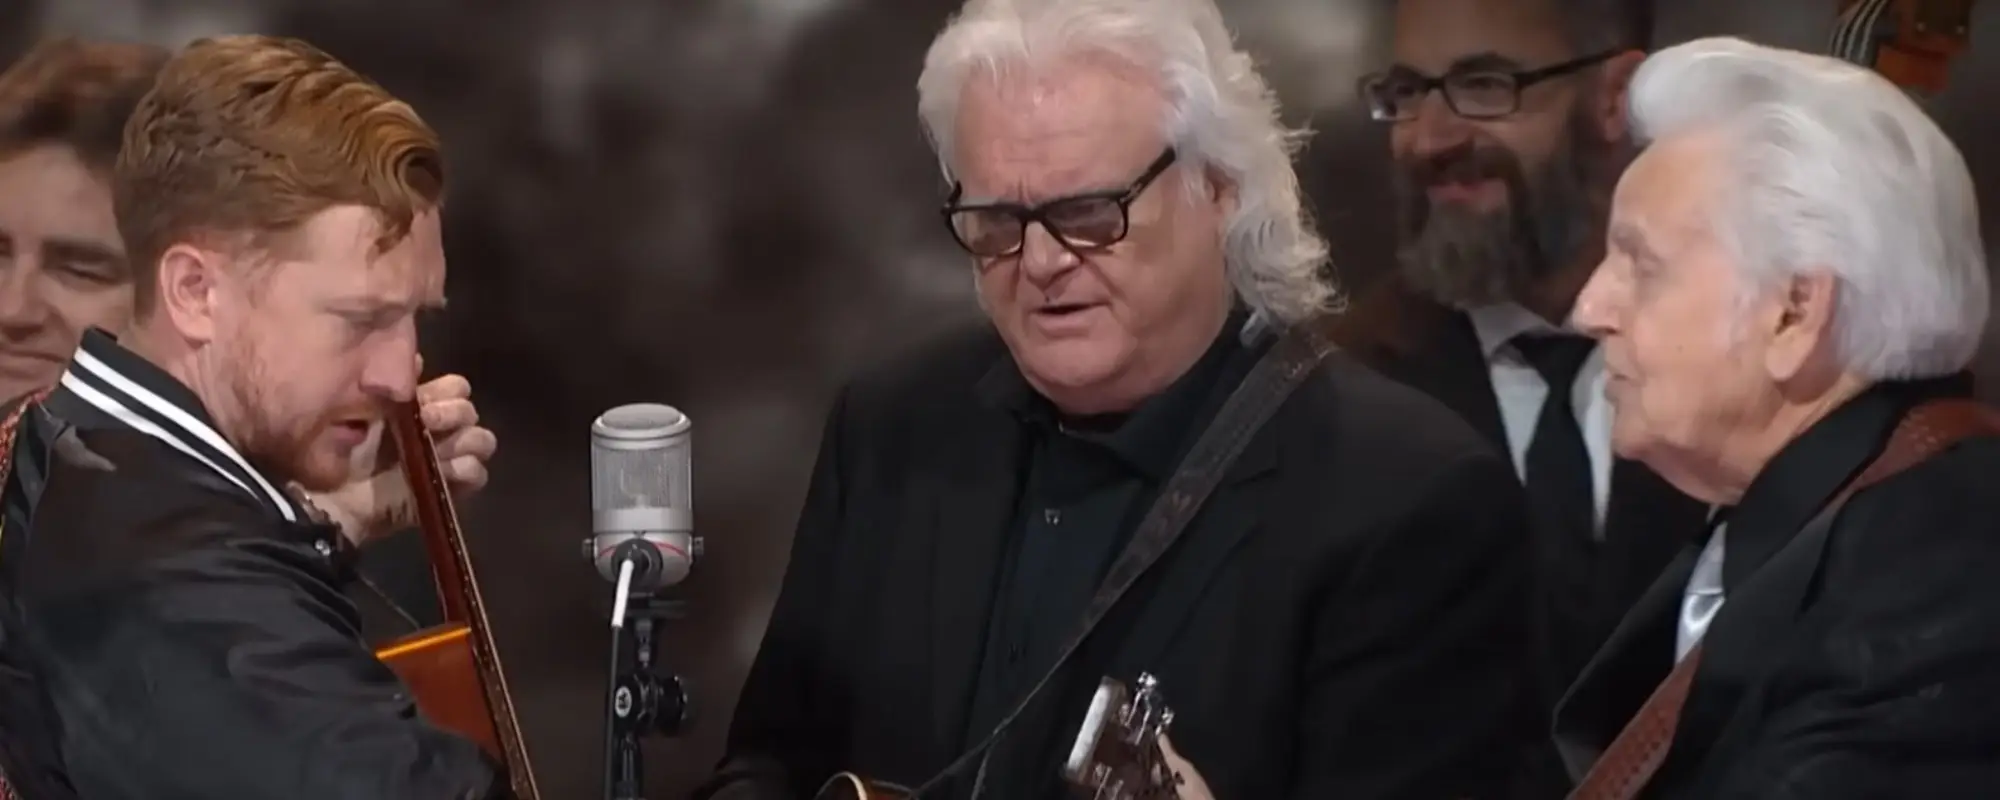 Watch Tyler Childers, Ricky Skaggs, and Del McCoury Band Bring That Old-Time Religion With Grand Ole Opry Performance